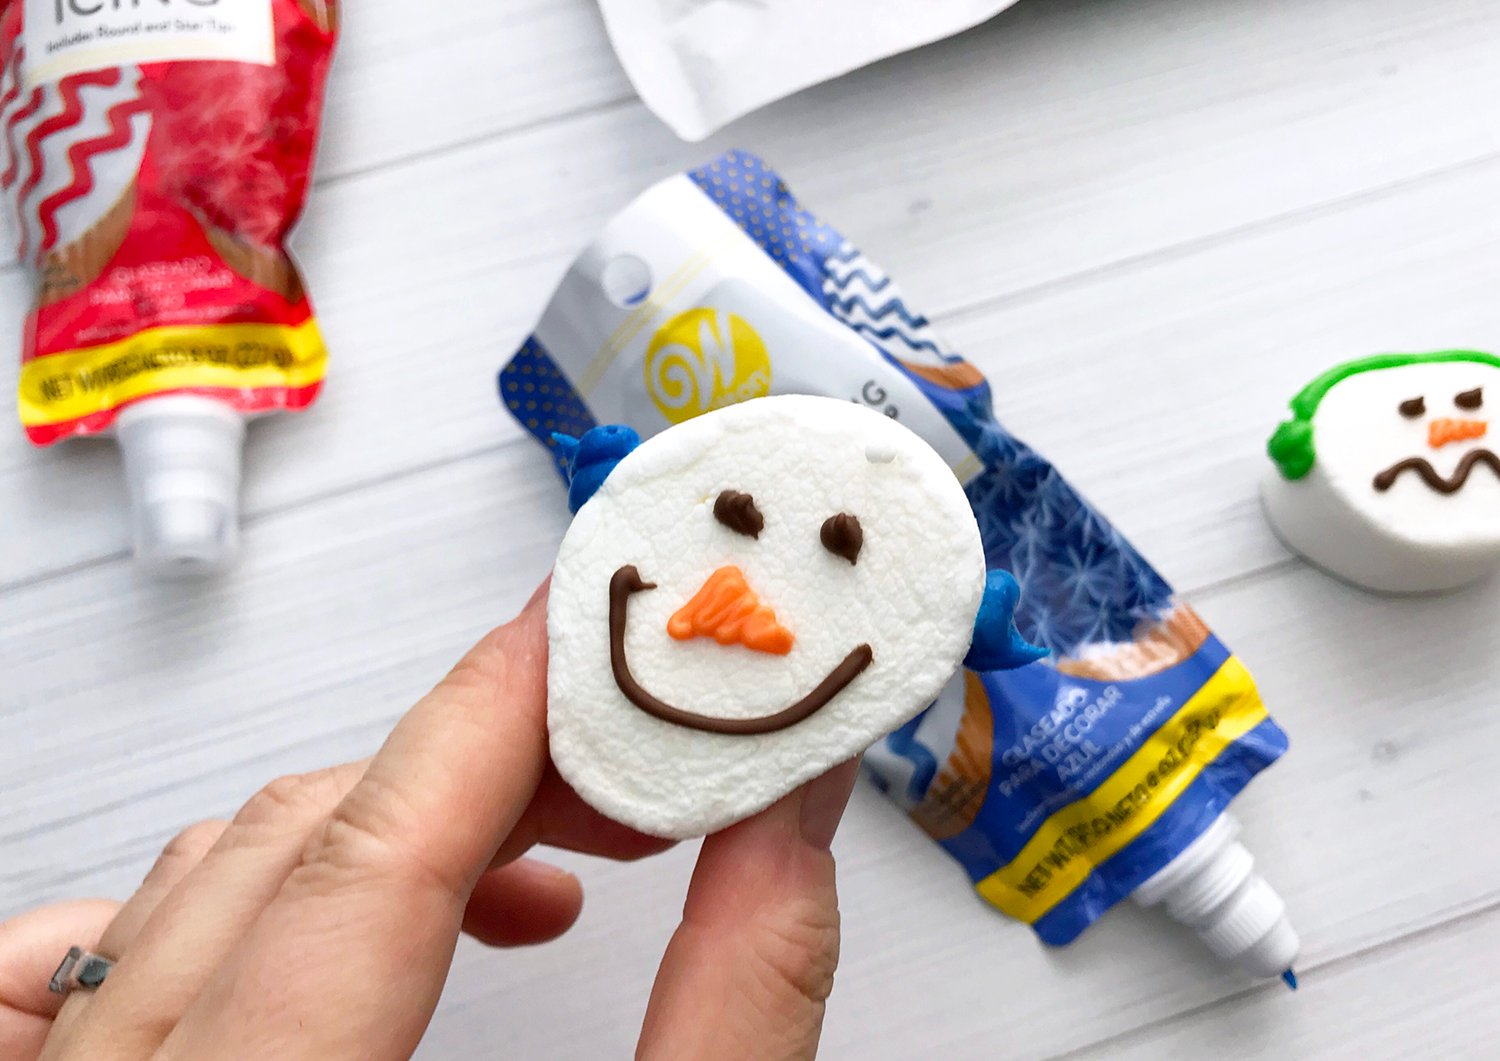 holding up smiling face marshmallow snowman